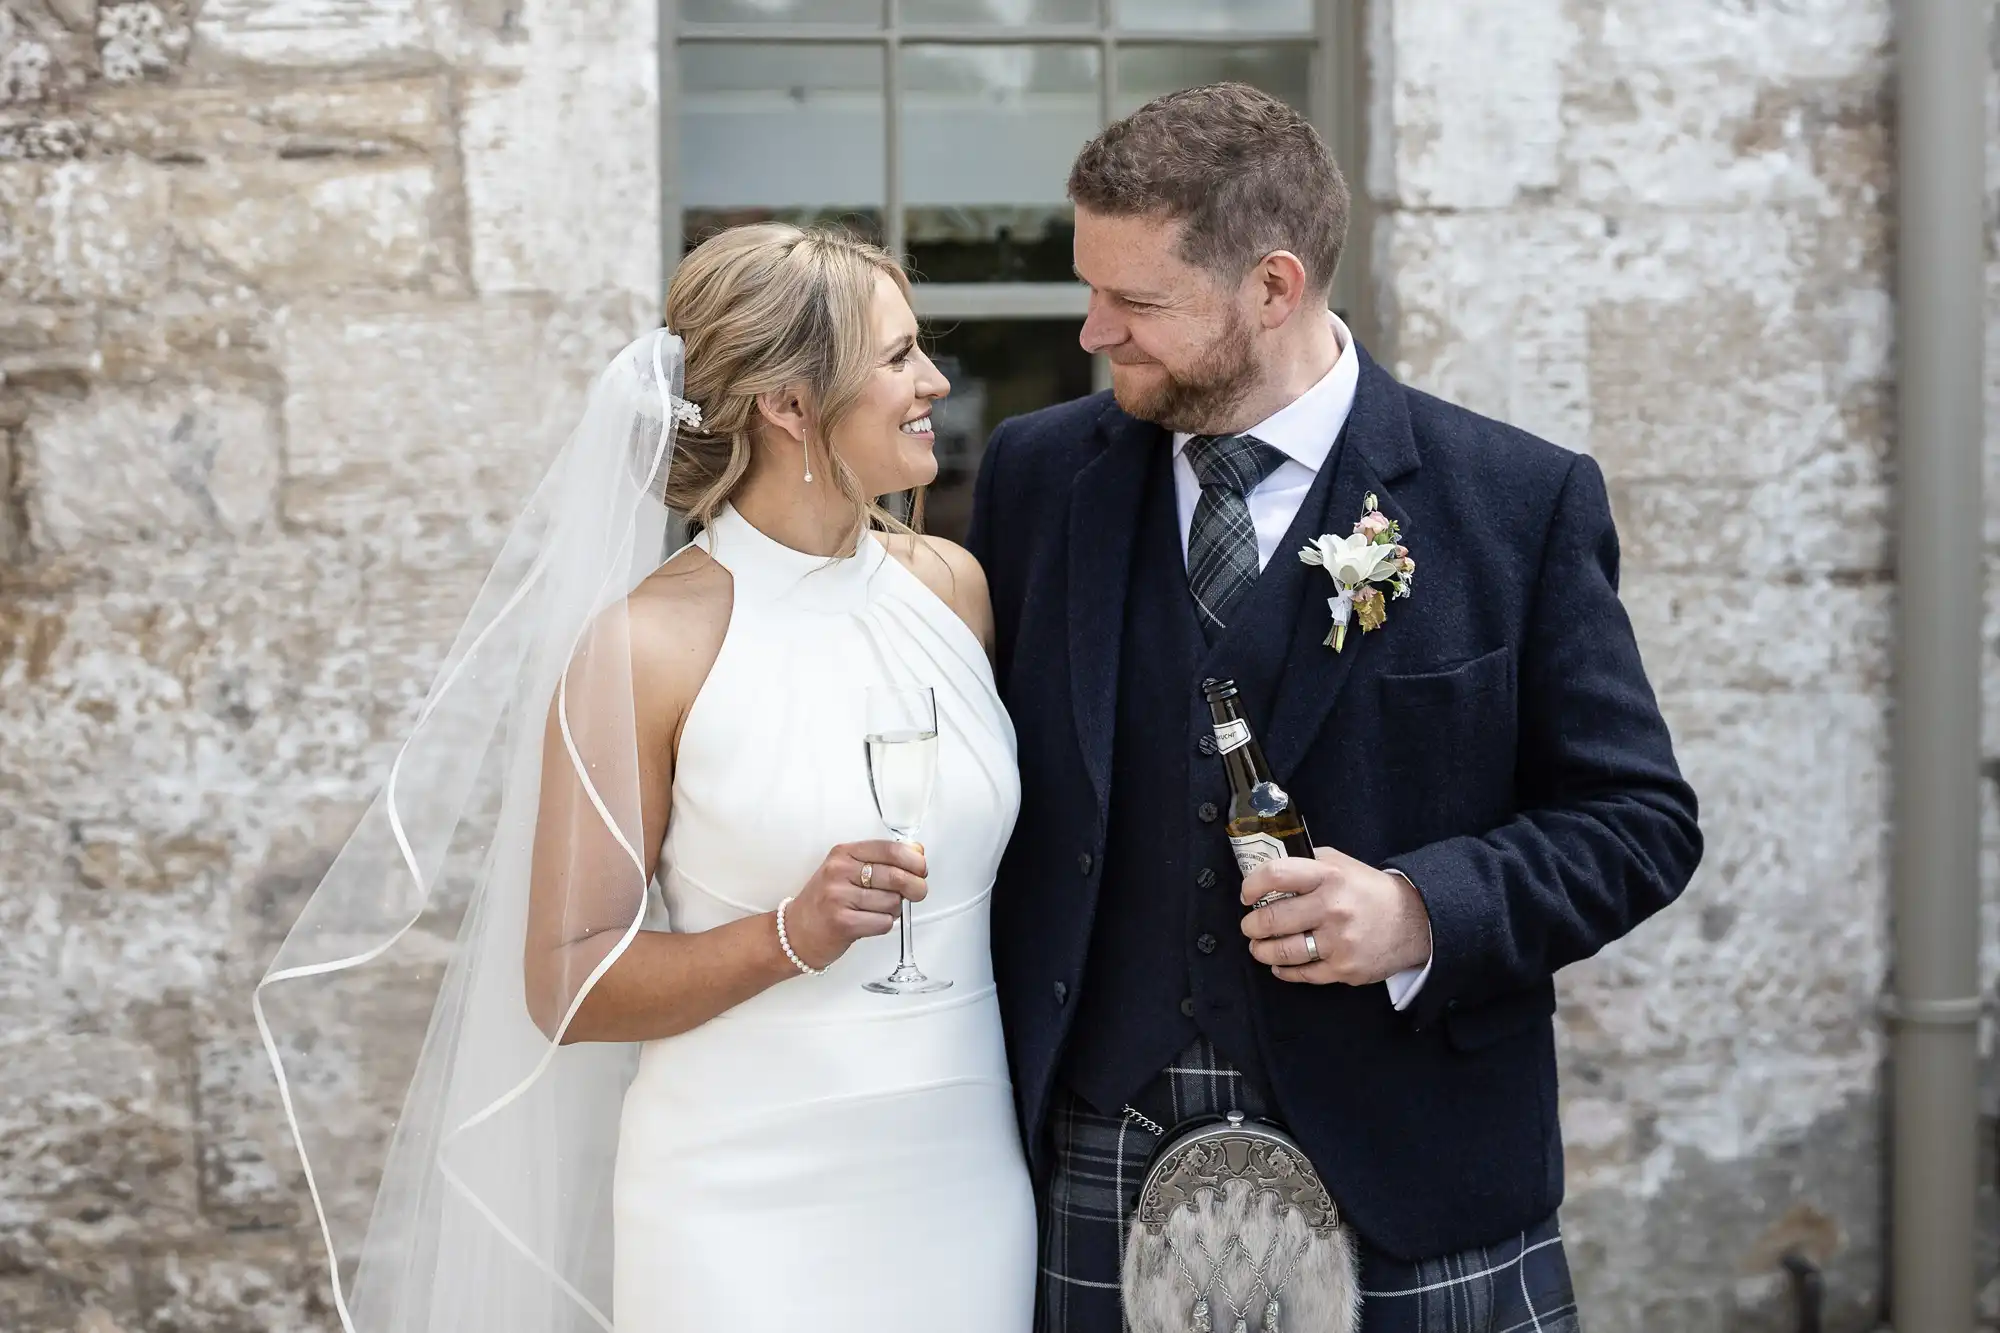 Bride in a white dress and groom in a kilt smiling at each other while holding champagne glasses at a wedding ceremony.